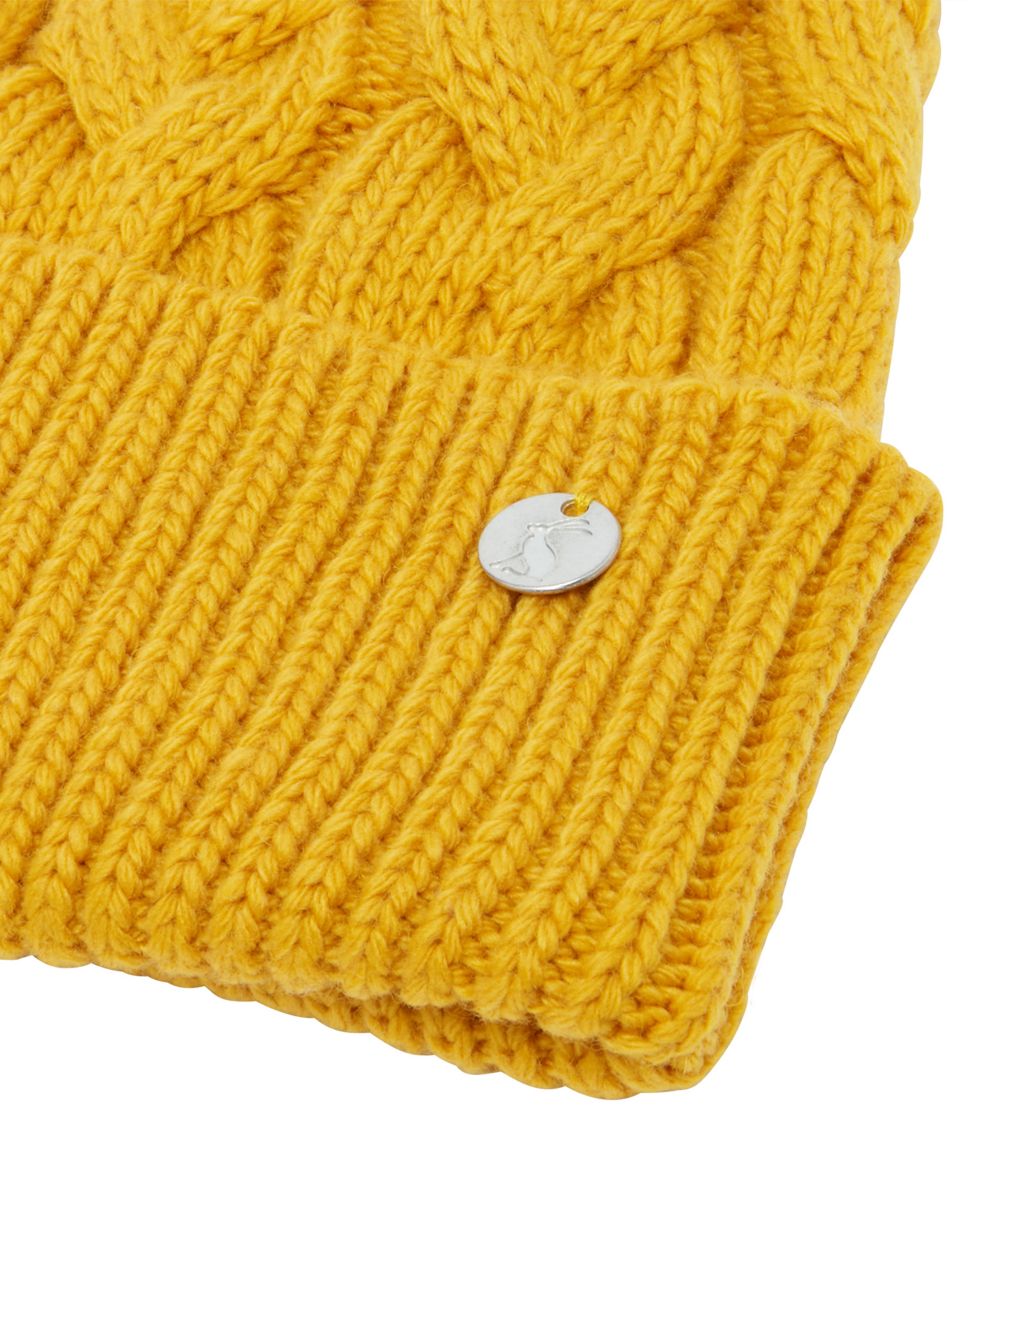 Knitted Pom Beanie Hat image 2